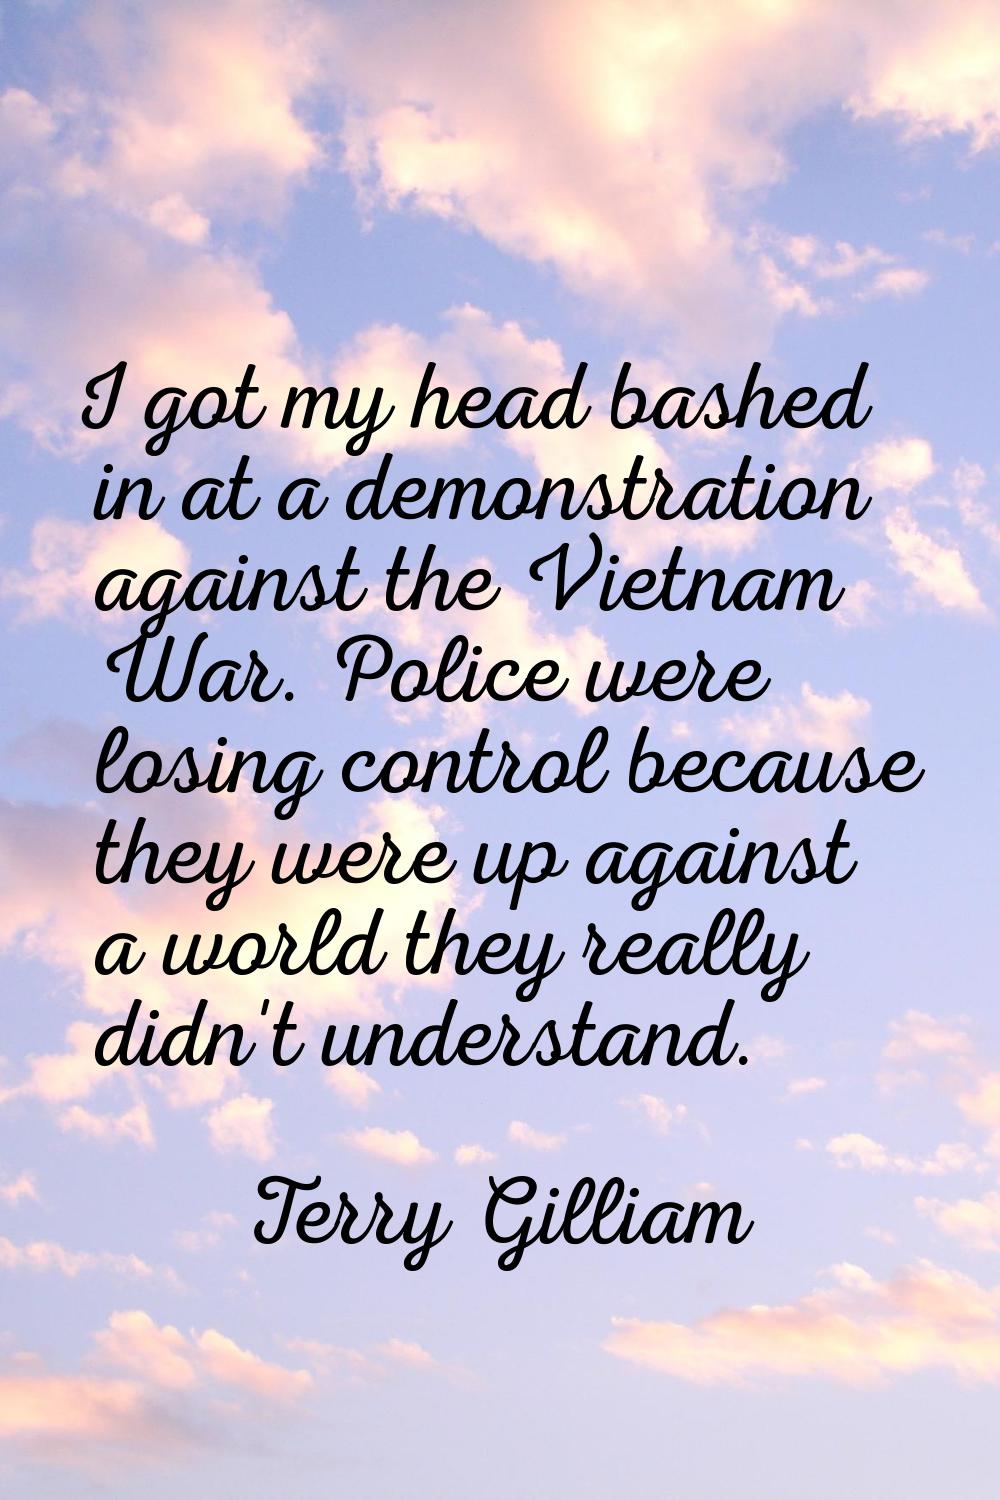 I got my head bashed in at a demonstration against the Vietnam War. Police were losing control beca